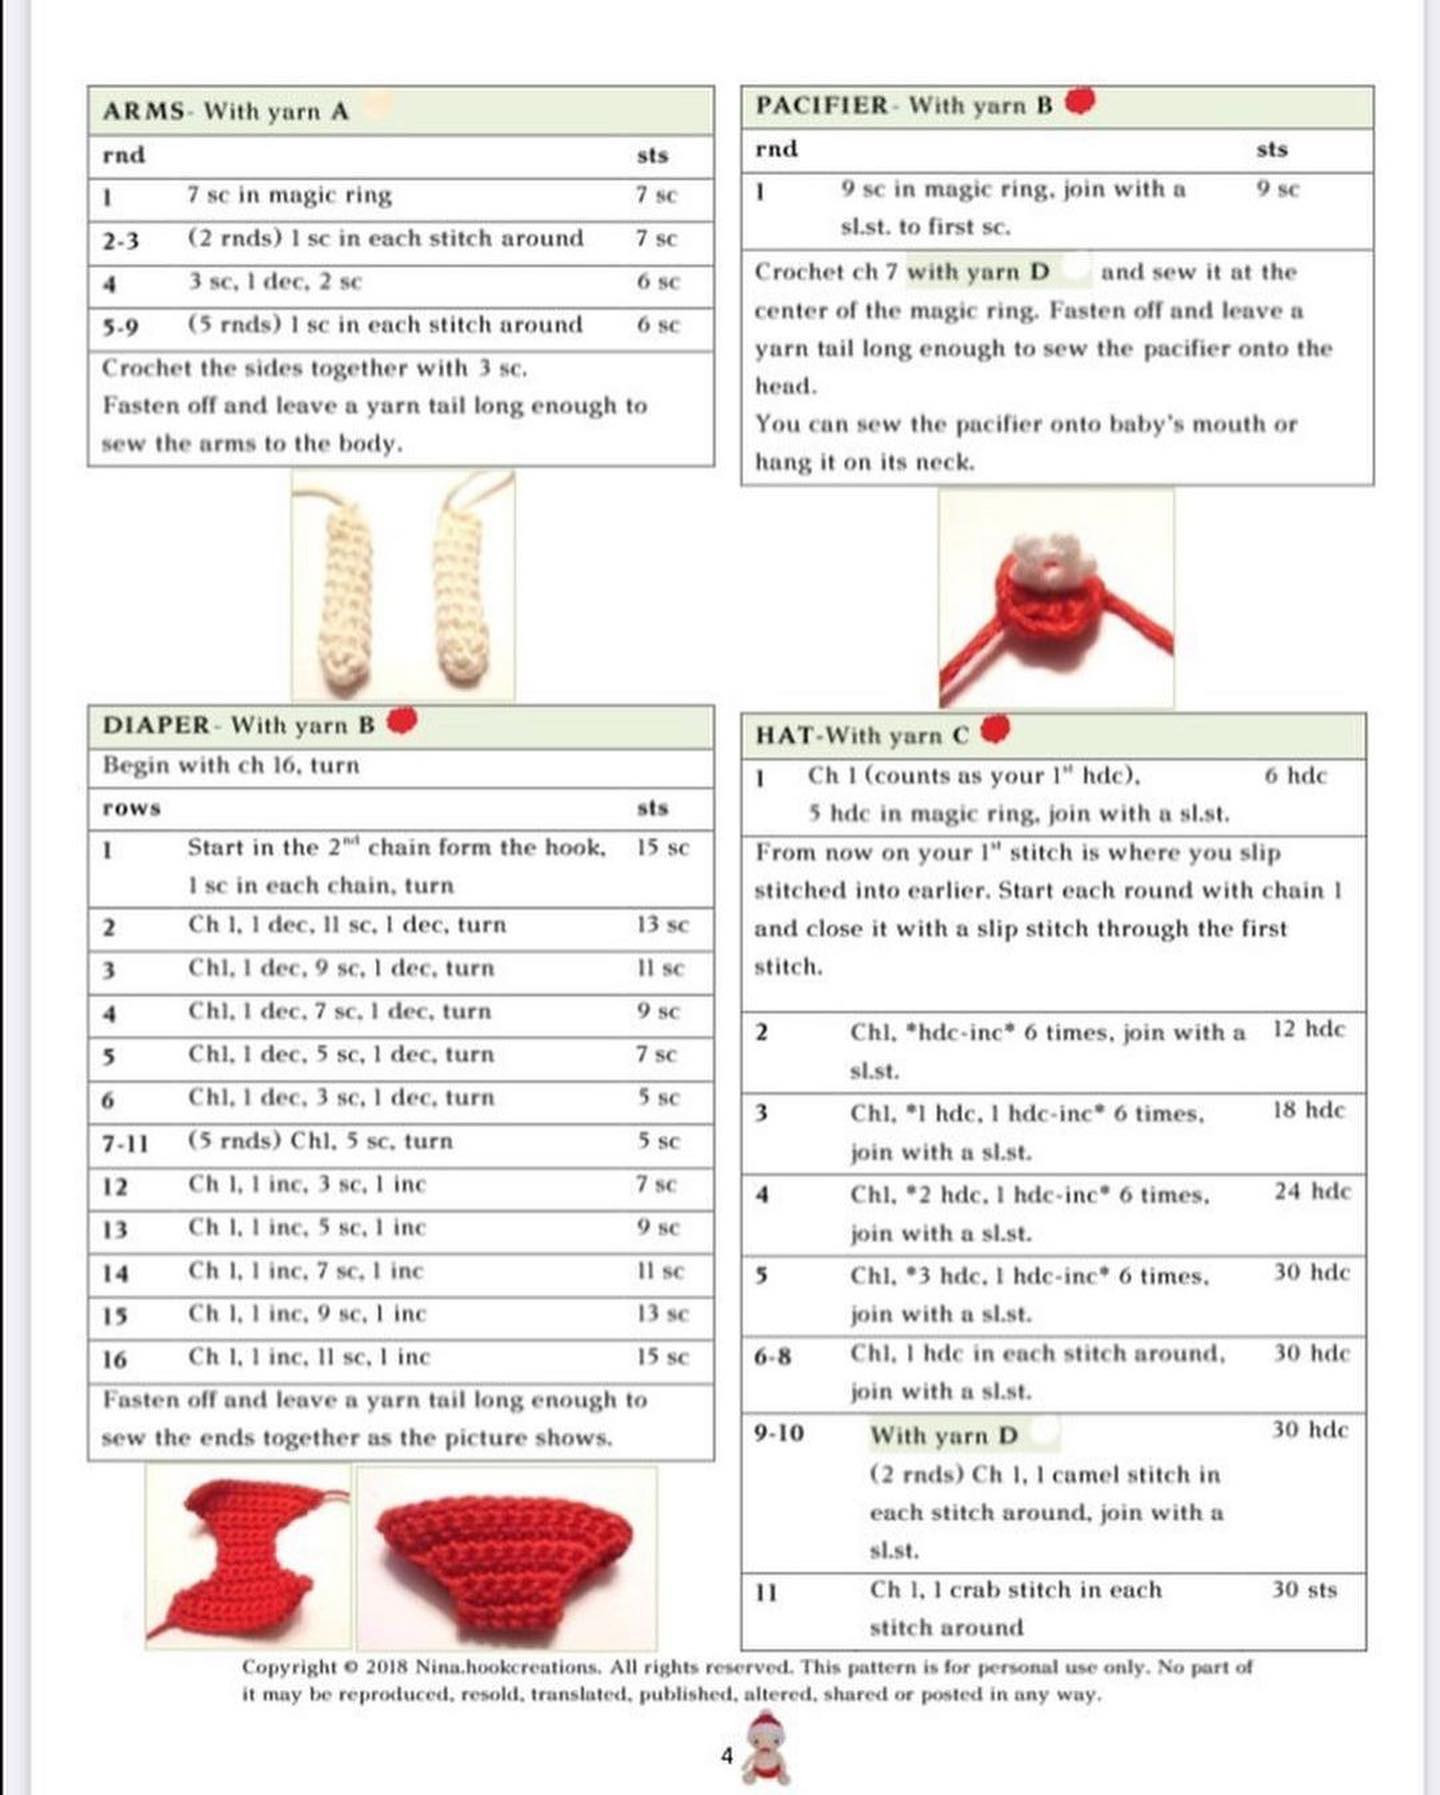 Crochet pattern for a baby holding a pacifier and wearing a red hat